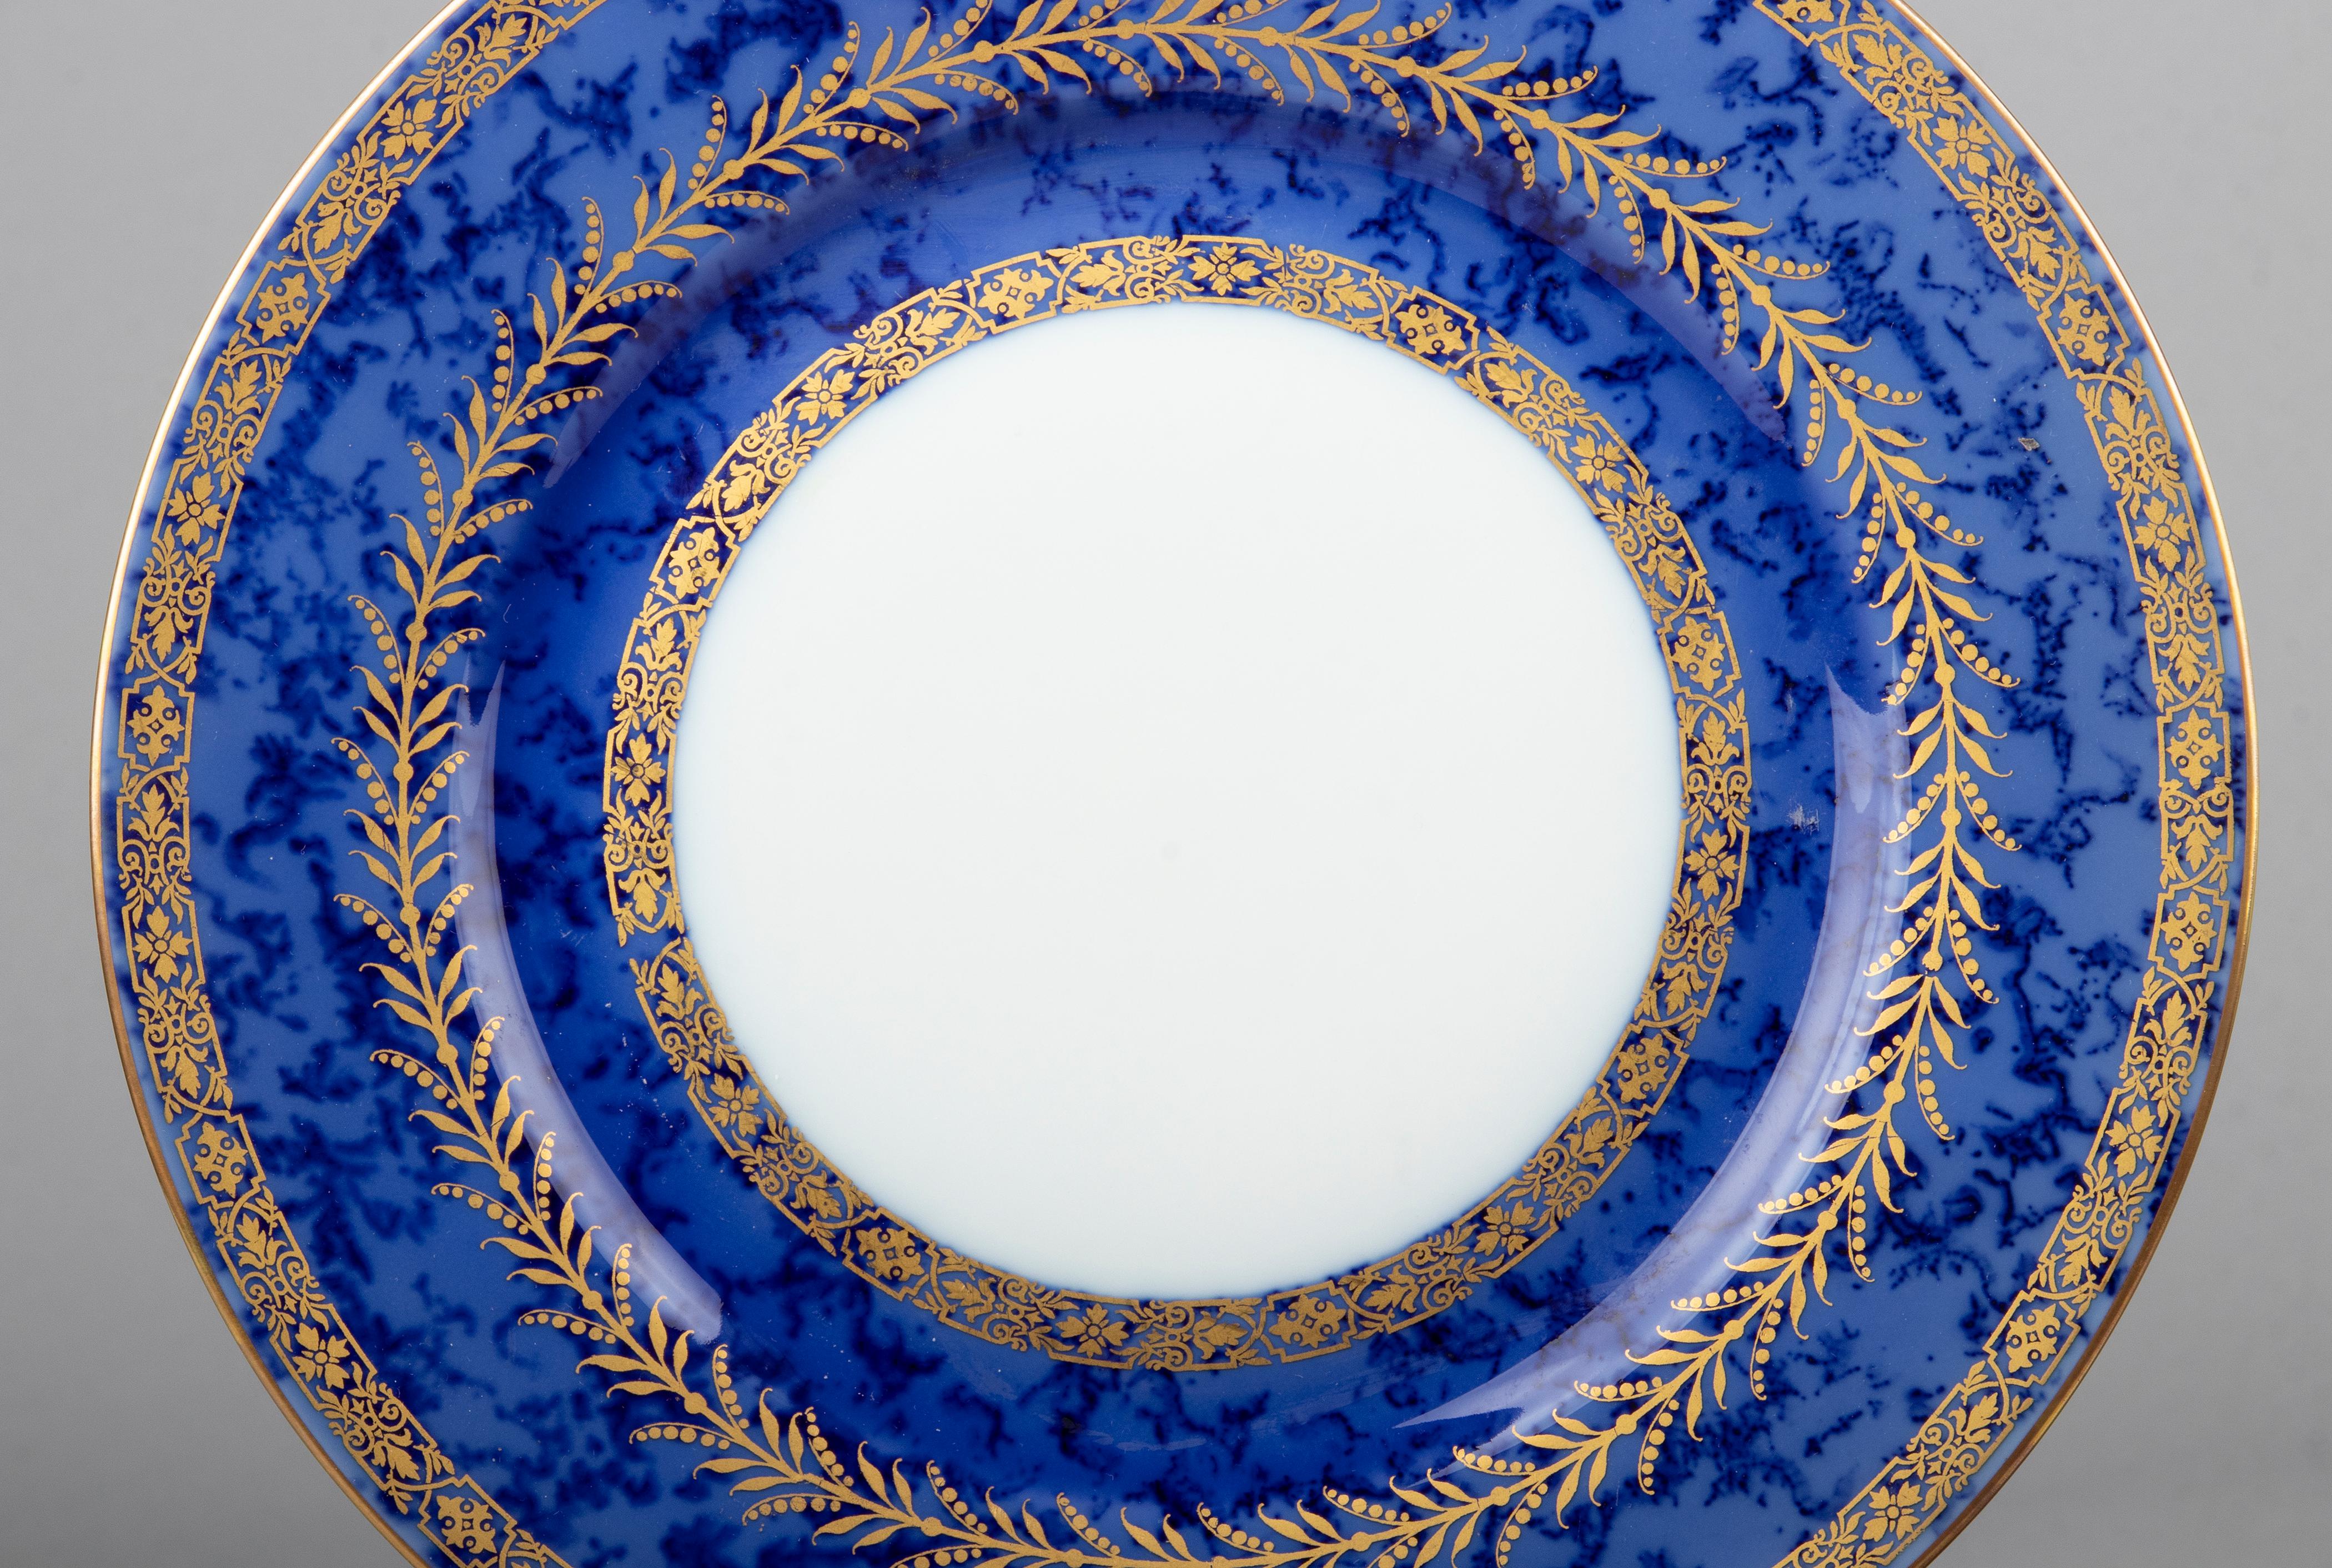 Hand-Crafted Set of 18 Porcelain Dinner Plates made by Raynaud Limoges